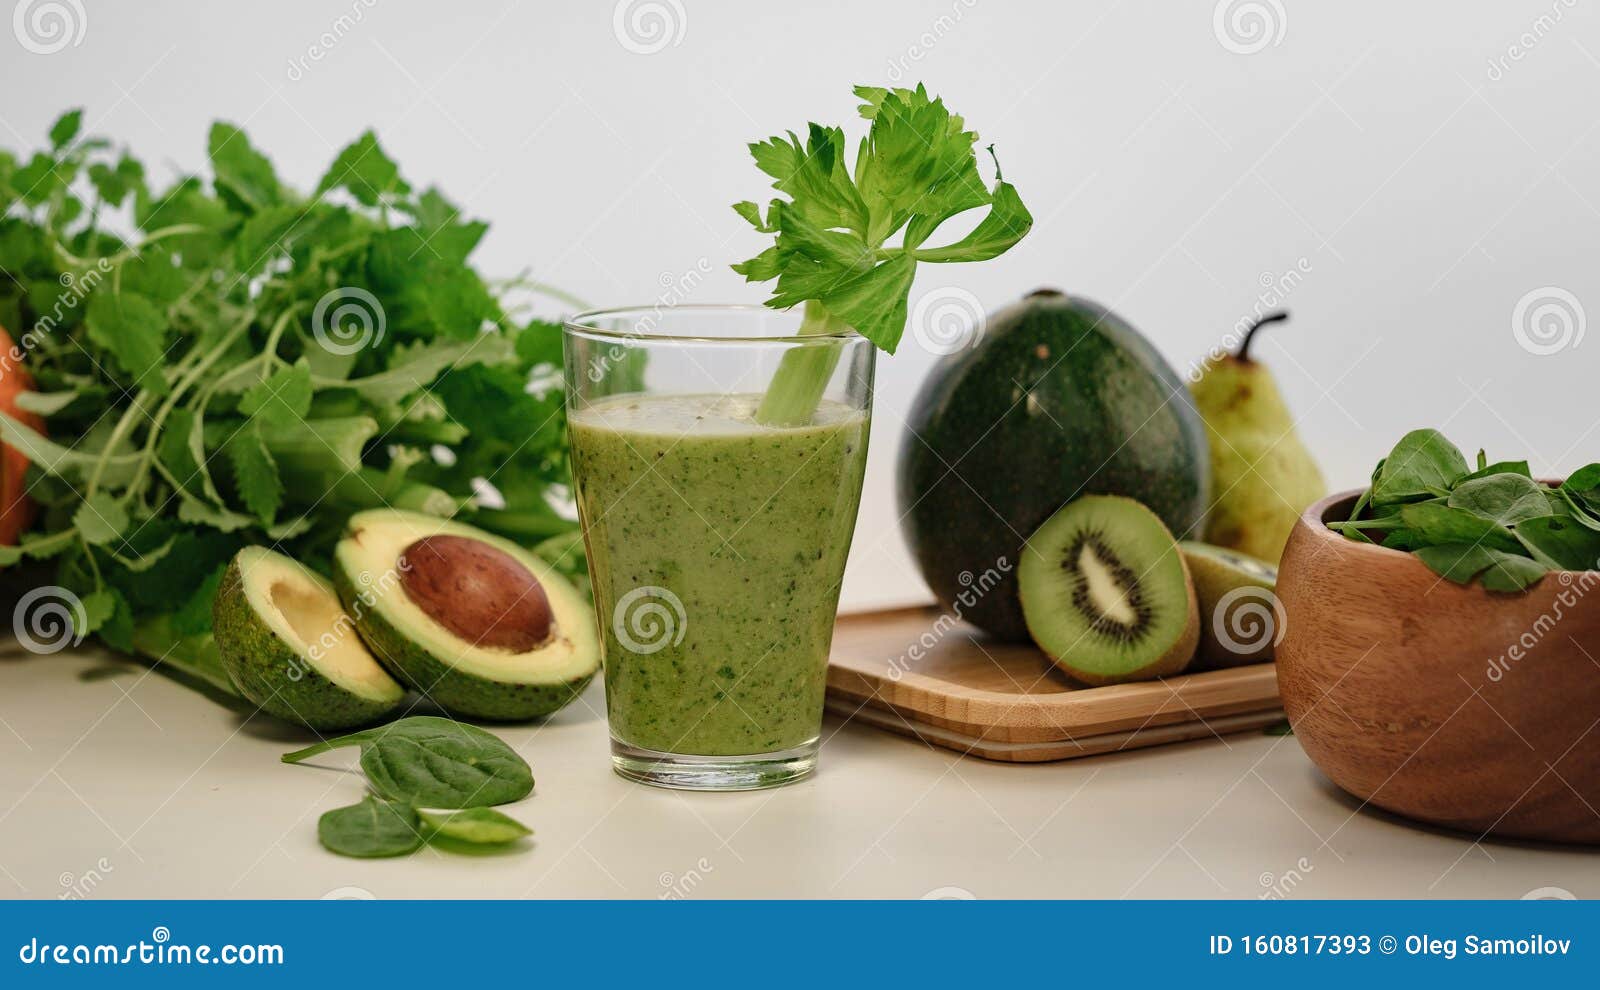 Green Smoothie with a Stalk of Celery in a Glass Cup. on the Table is an  Avocado. Stock Image - Image of kiwi, celery: 160817393